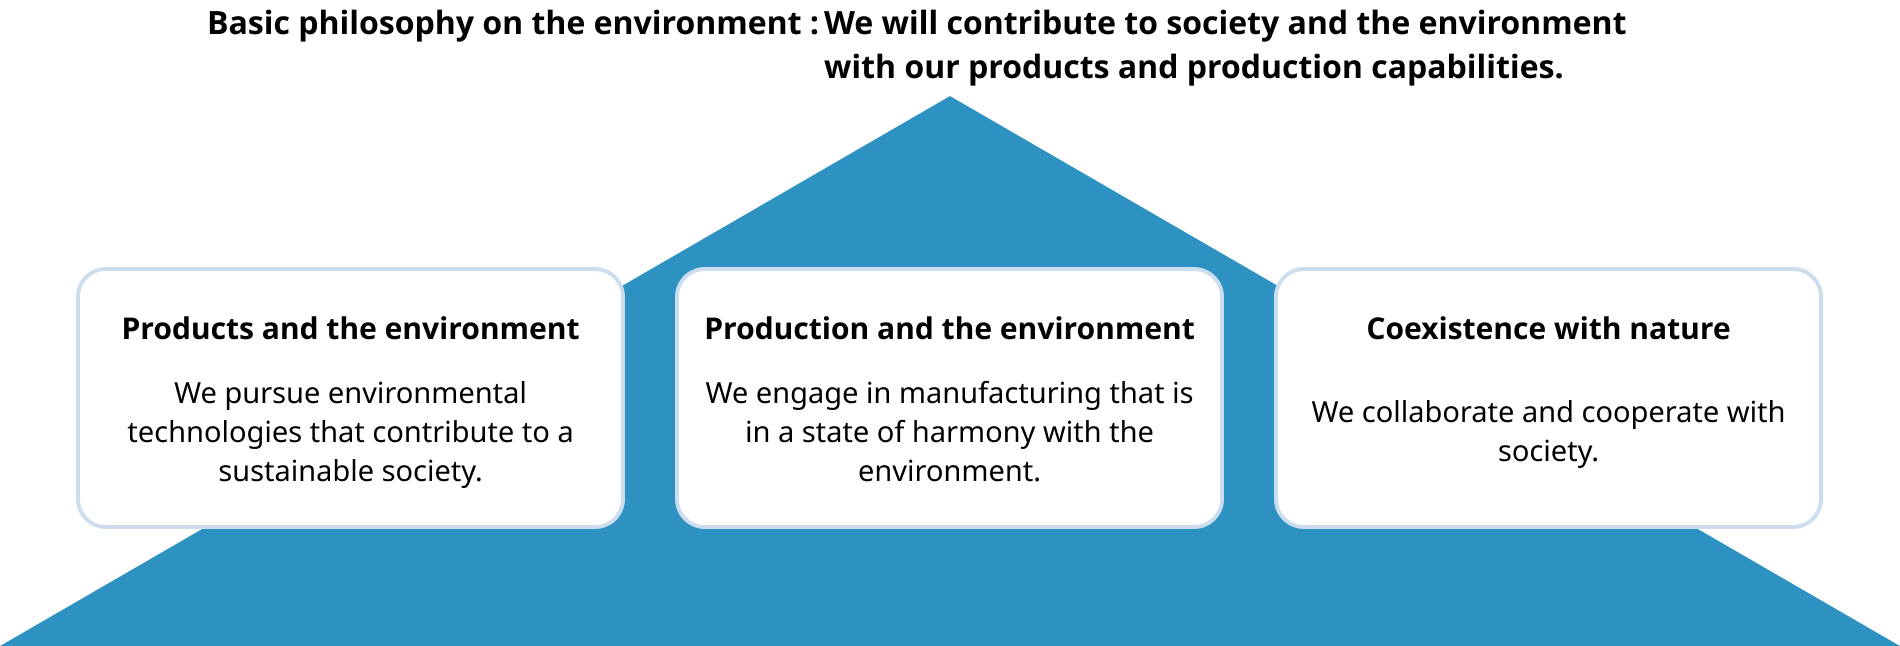 Basic philosophy on the environment: We will contribute to society and the environment with our products and production capabilities. Products and the environment We pursue environmental technologies that contribute to a sustainable society. Production and the environment We engage in manufacturing that is in a state of harmony with the environment. Coexistence with nature We collaborate and cooperate with society.